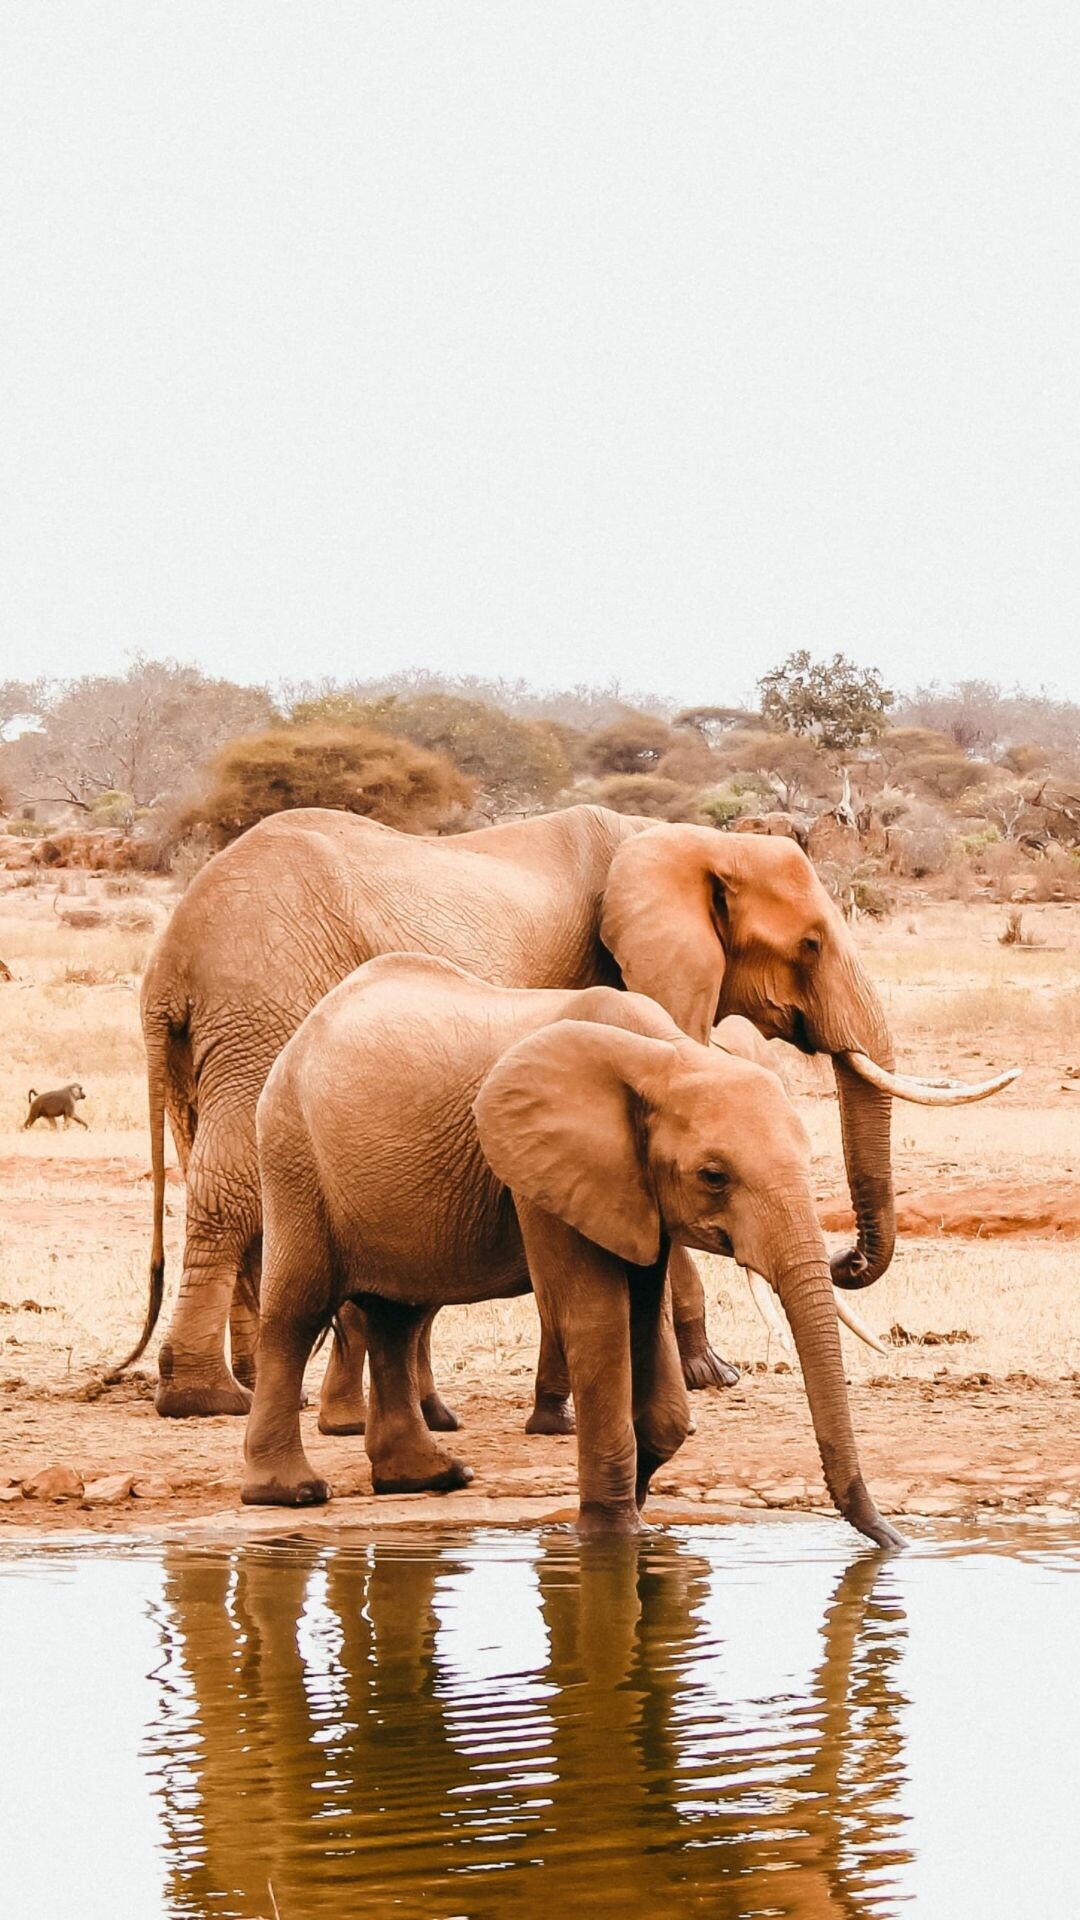 Elephant: Elephants need extensive land areas to survive and meet their ecological needs, which include food, water, and space. 1080x1920 Full HD Background.